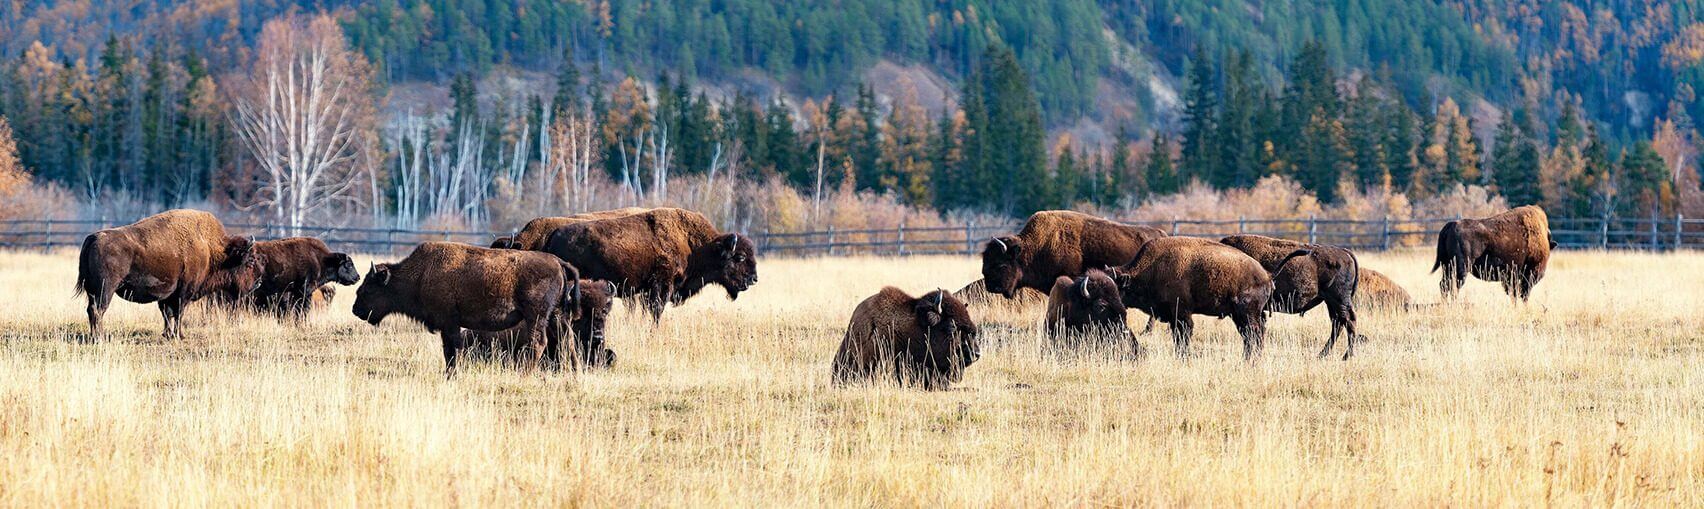 Scottish Highland Cattle And American Plains Bison